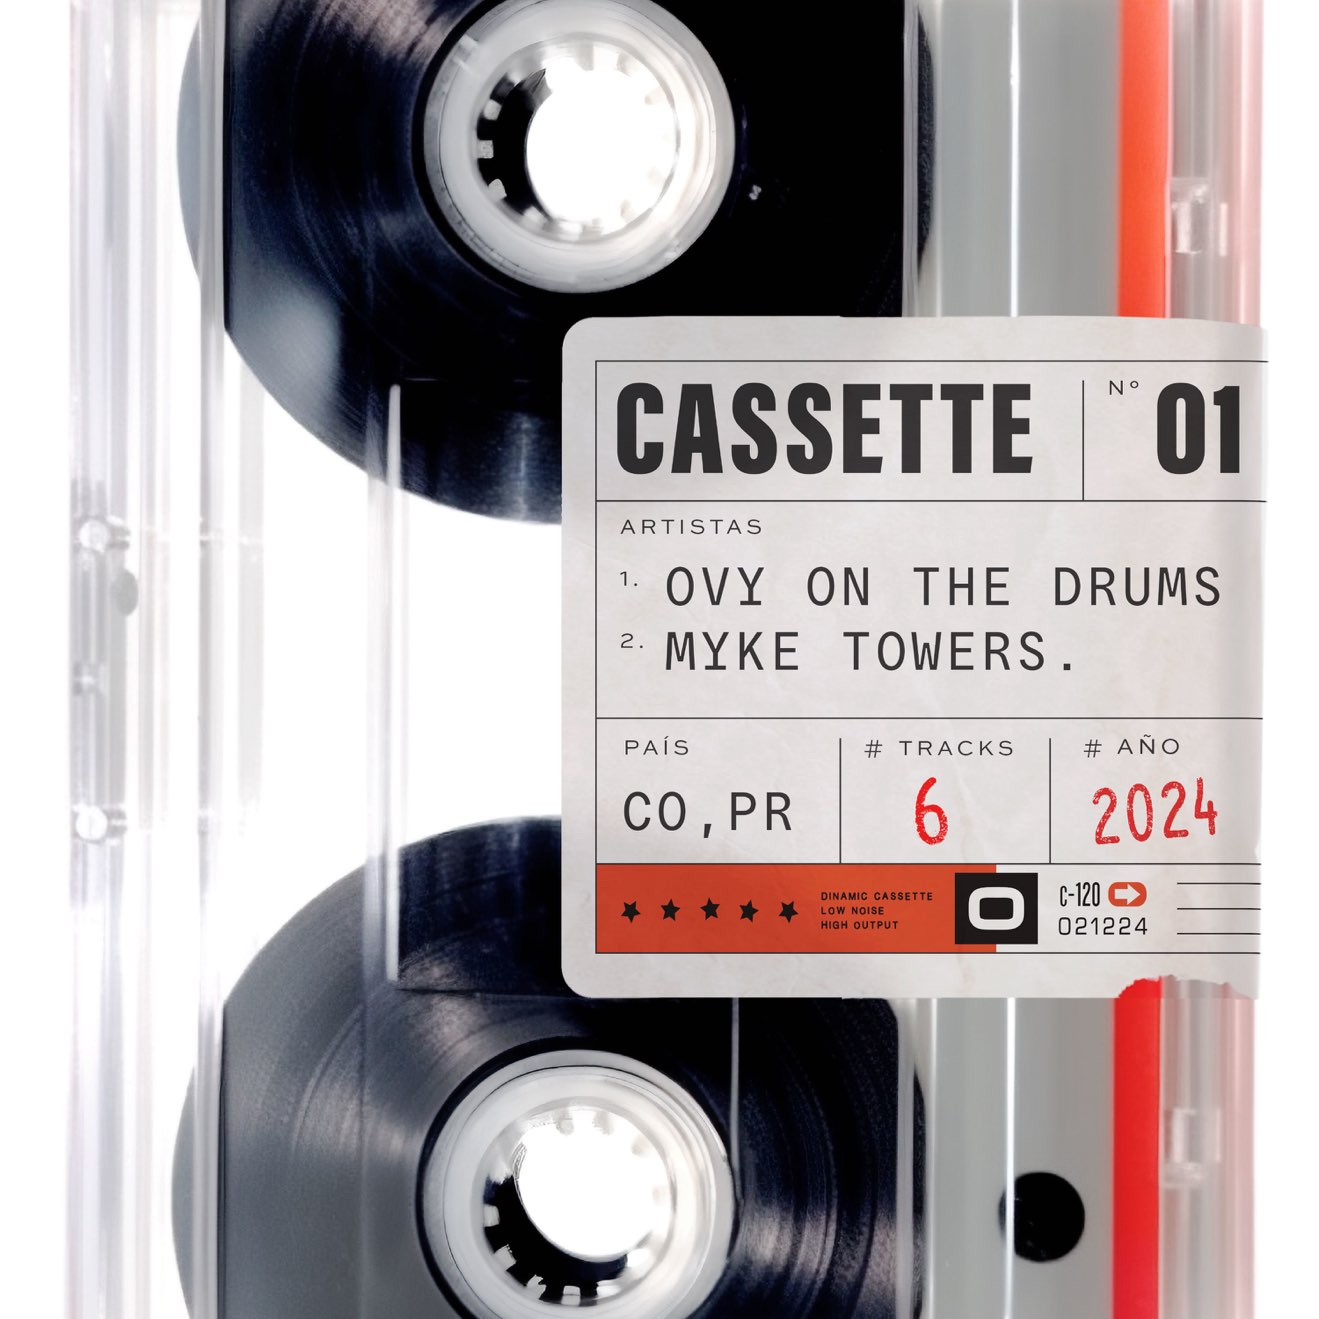 Ovy On the Drums & Myke Towers – CASSETTE 01 – EP (2024) [iTunes Match M4A]